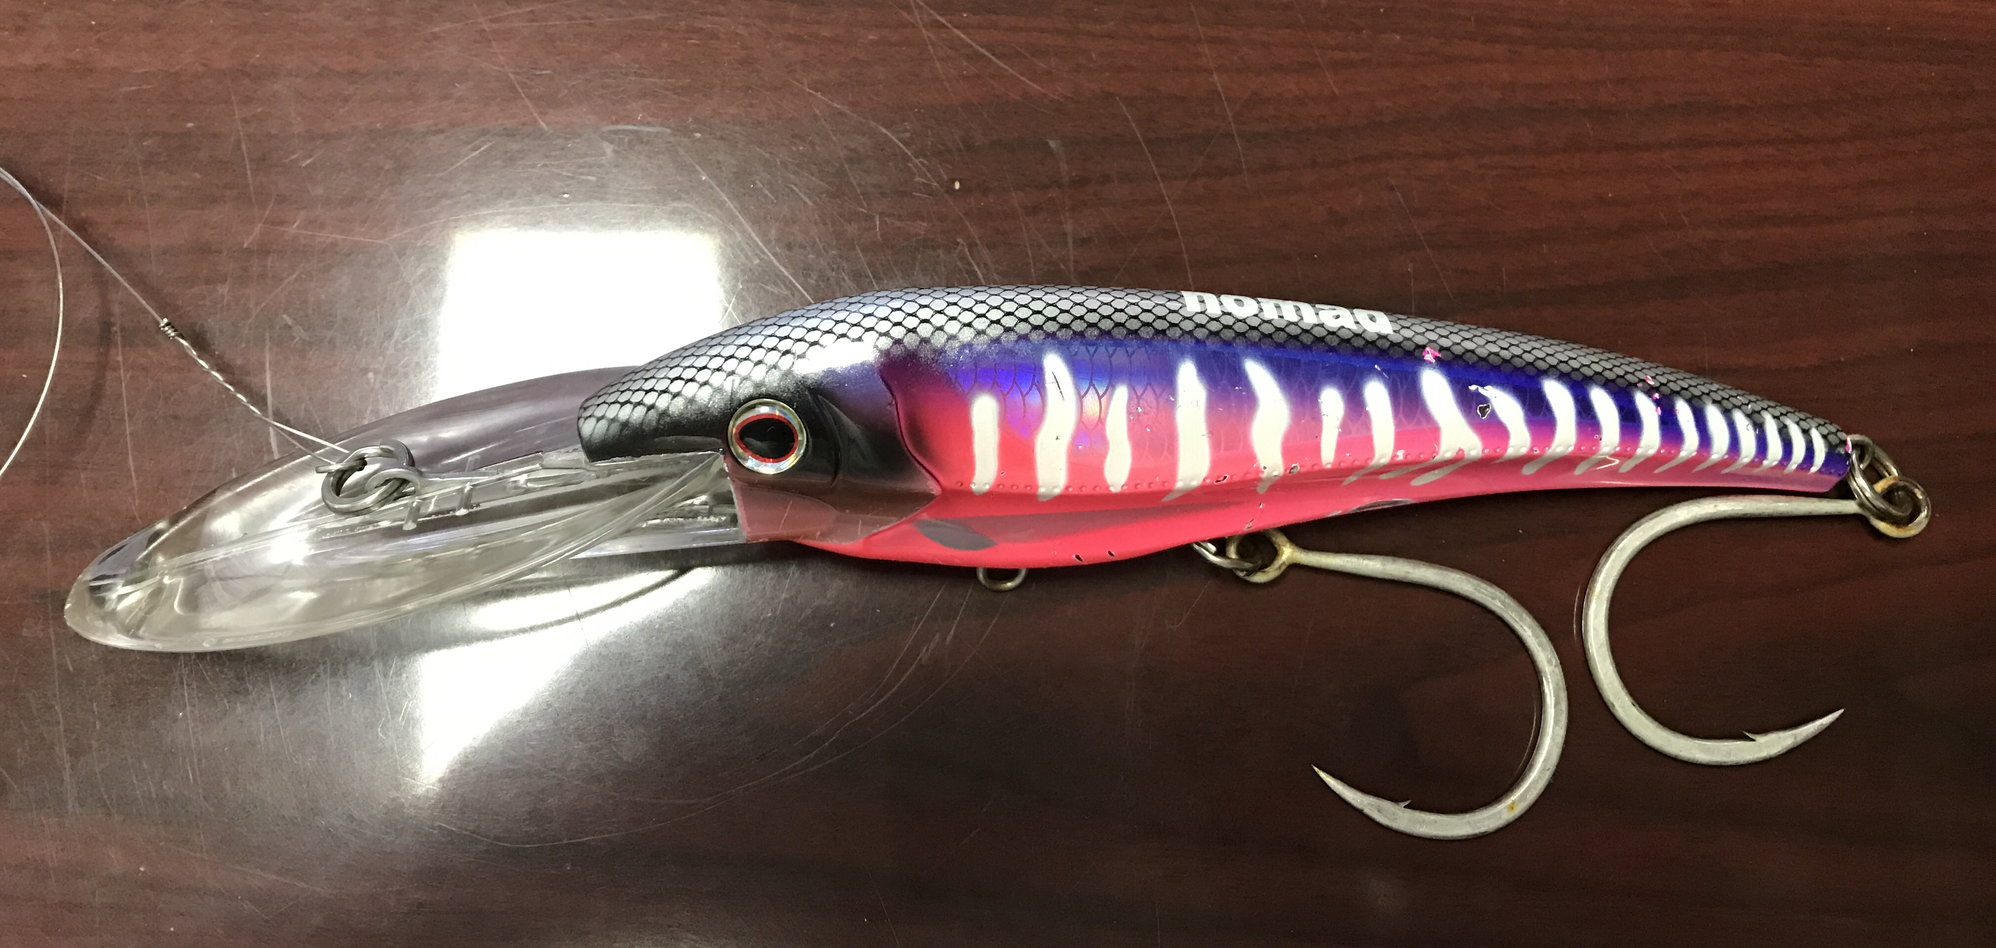 Nomad dtx minnow? - The Hull Truth - Boating and Fishing Forum